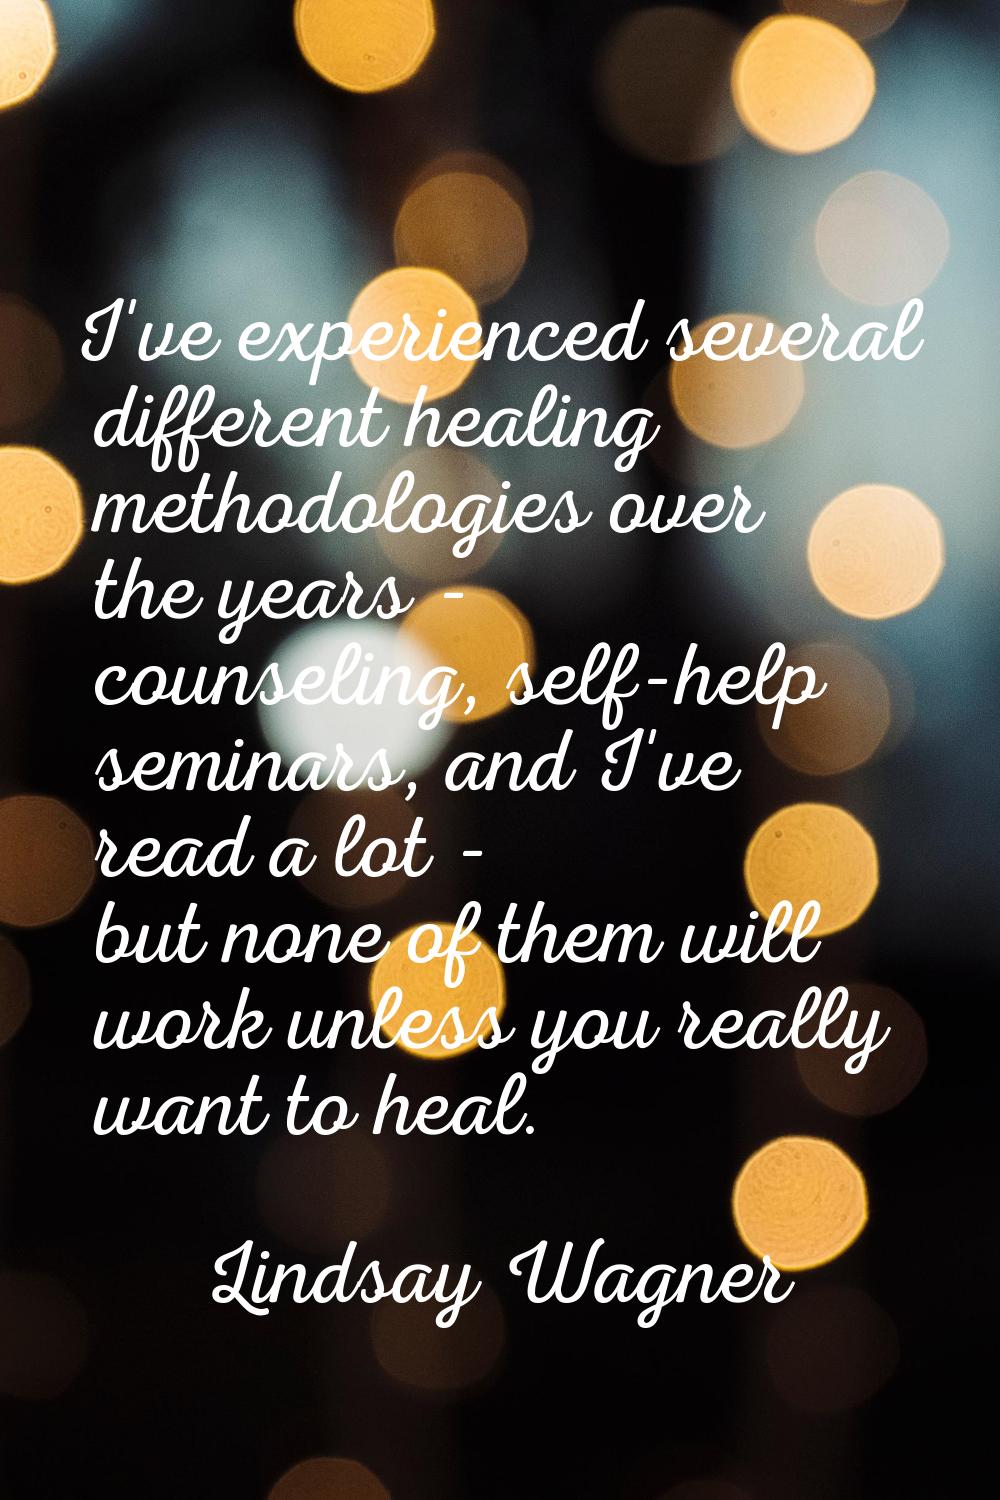 I've experienced several different healing methodologies over the years - counseling, self-help sem